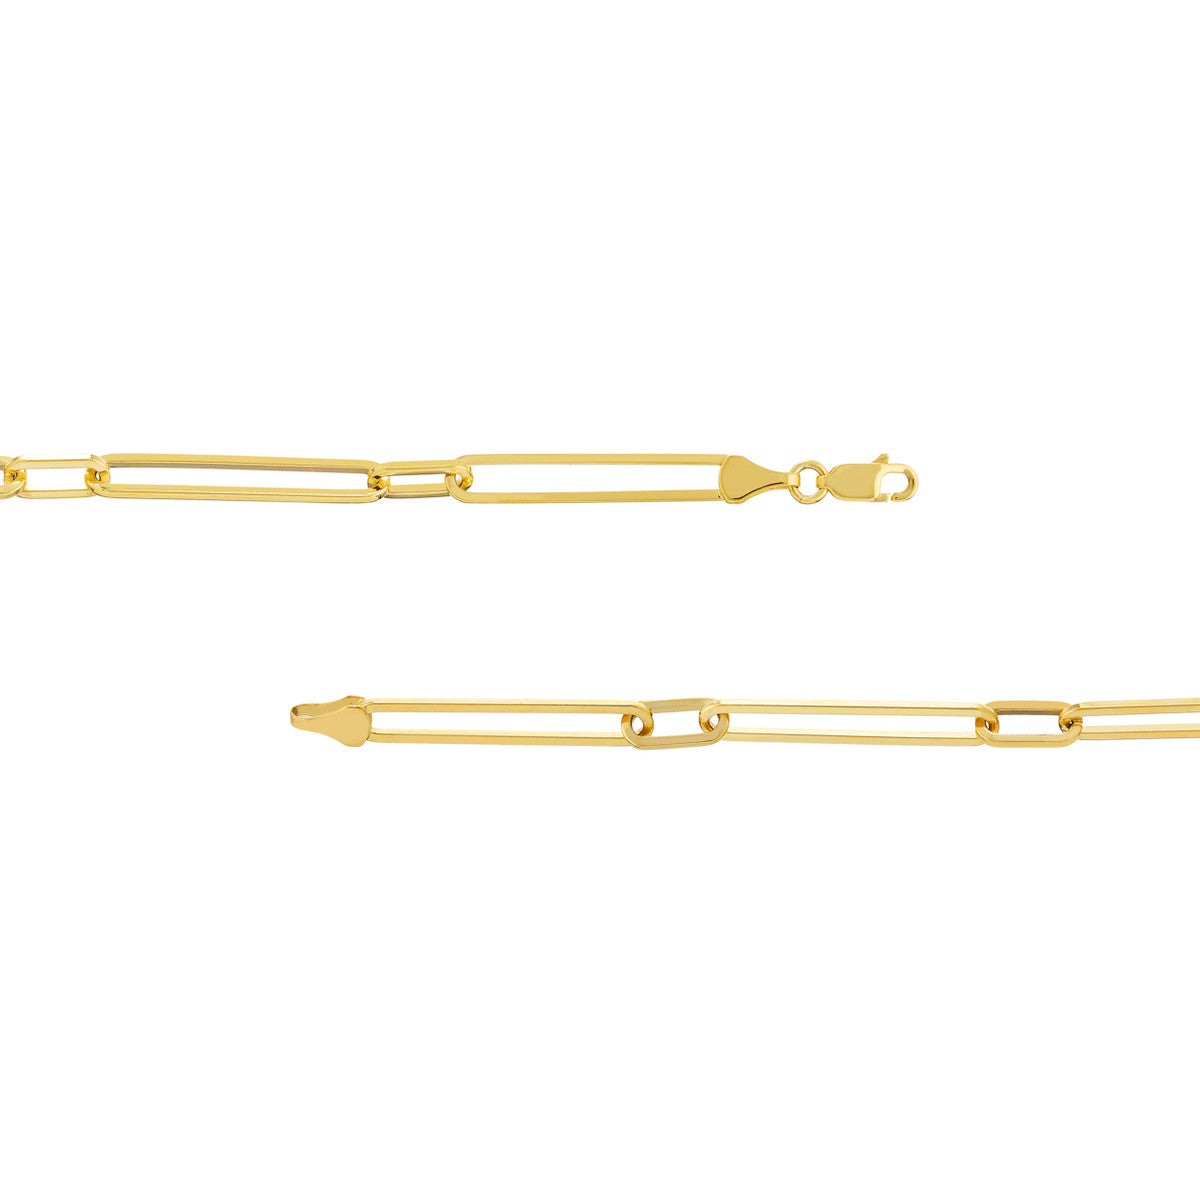 Alternating Length Long Link Chain Necklace